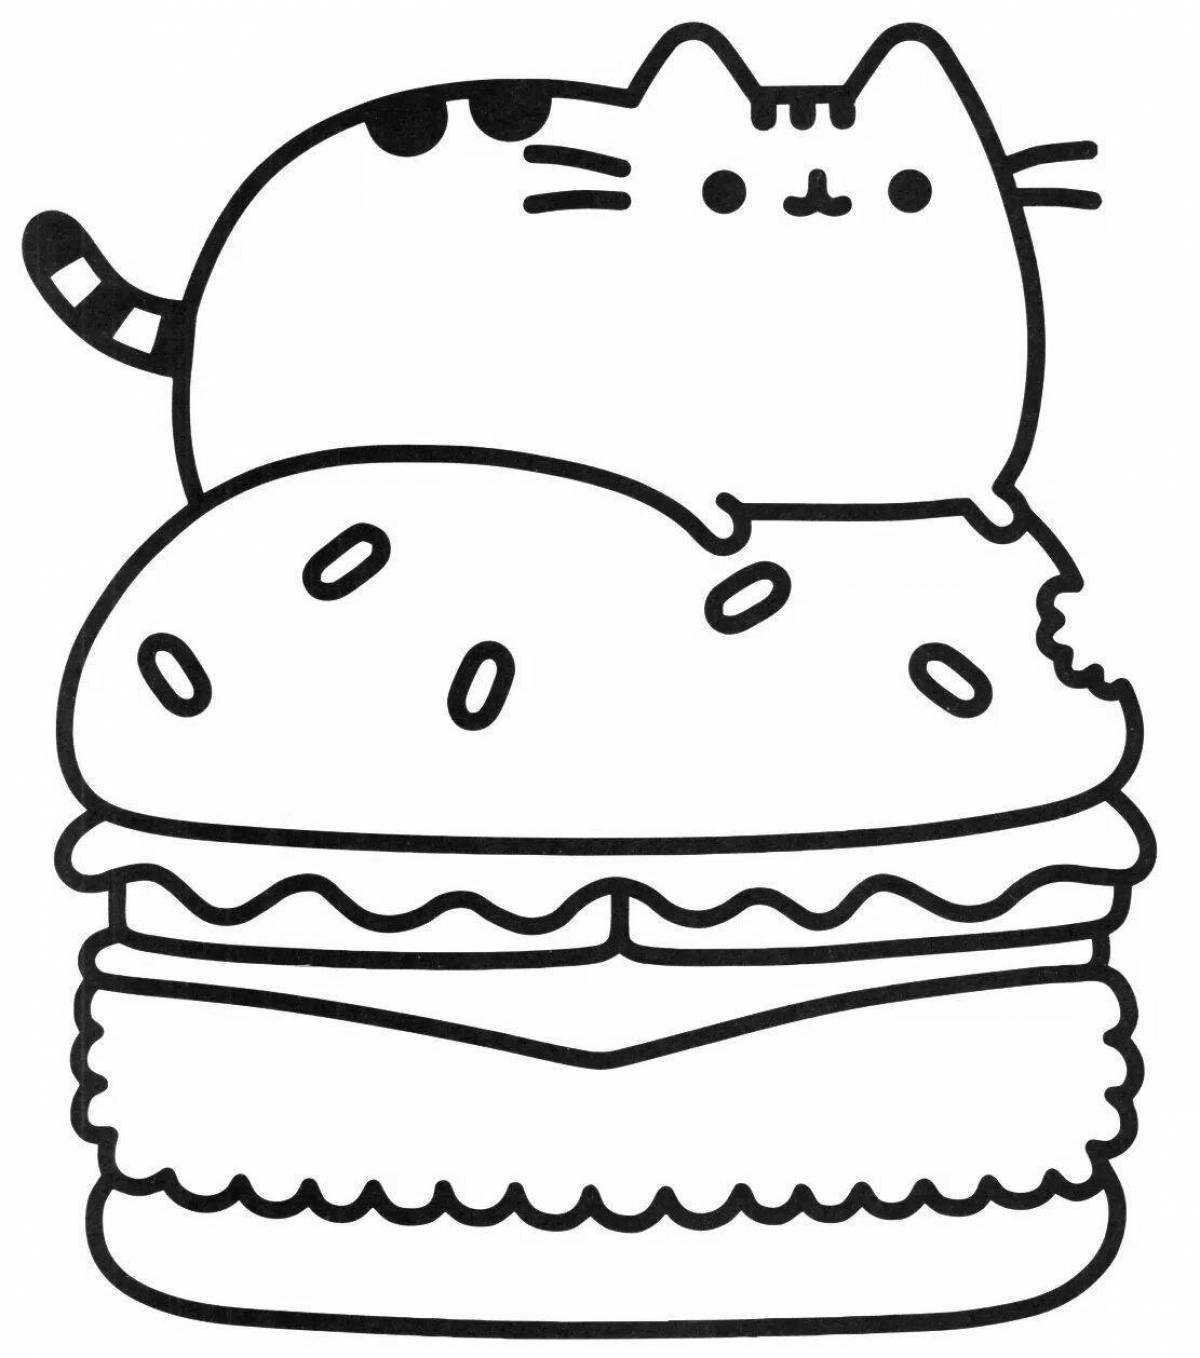 Amazing pusheen cat coloring page